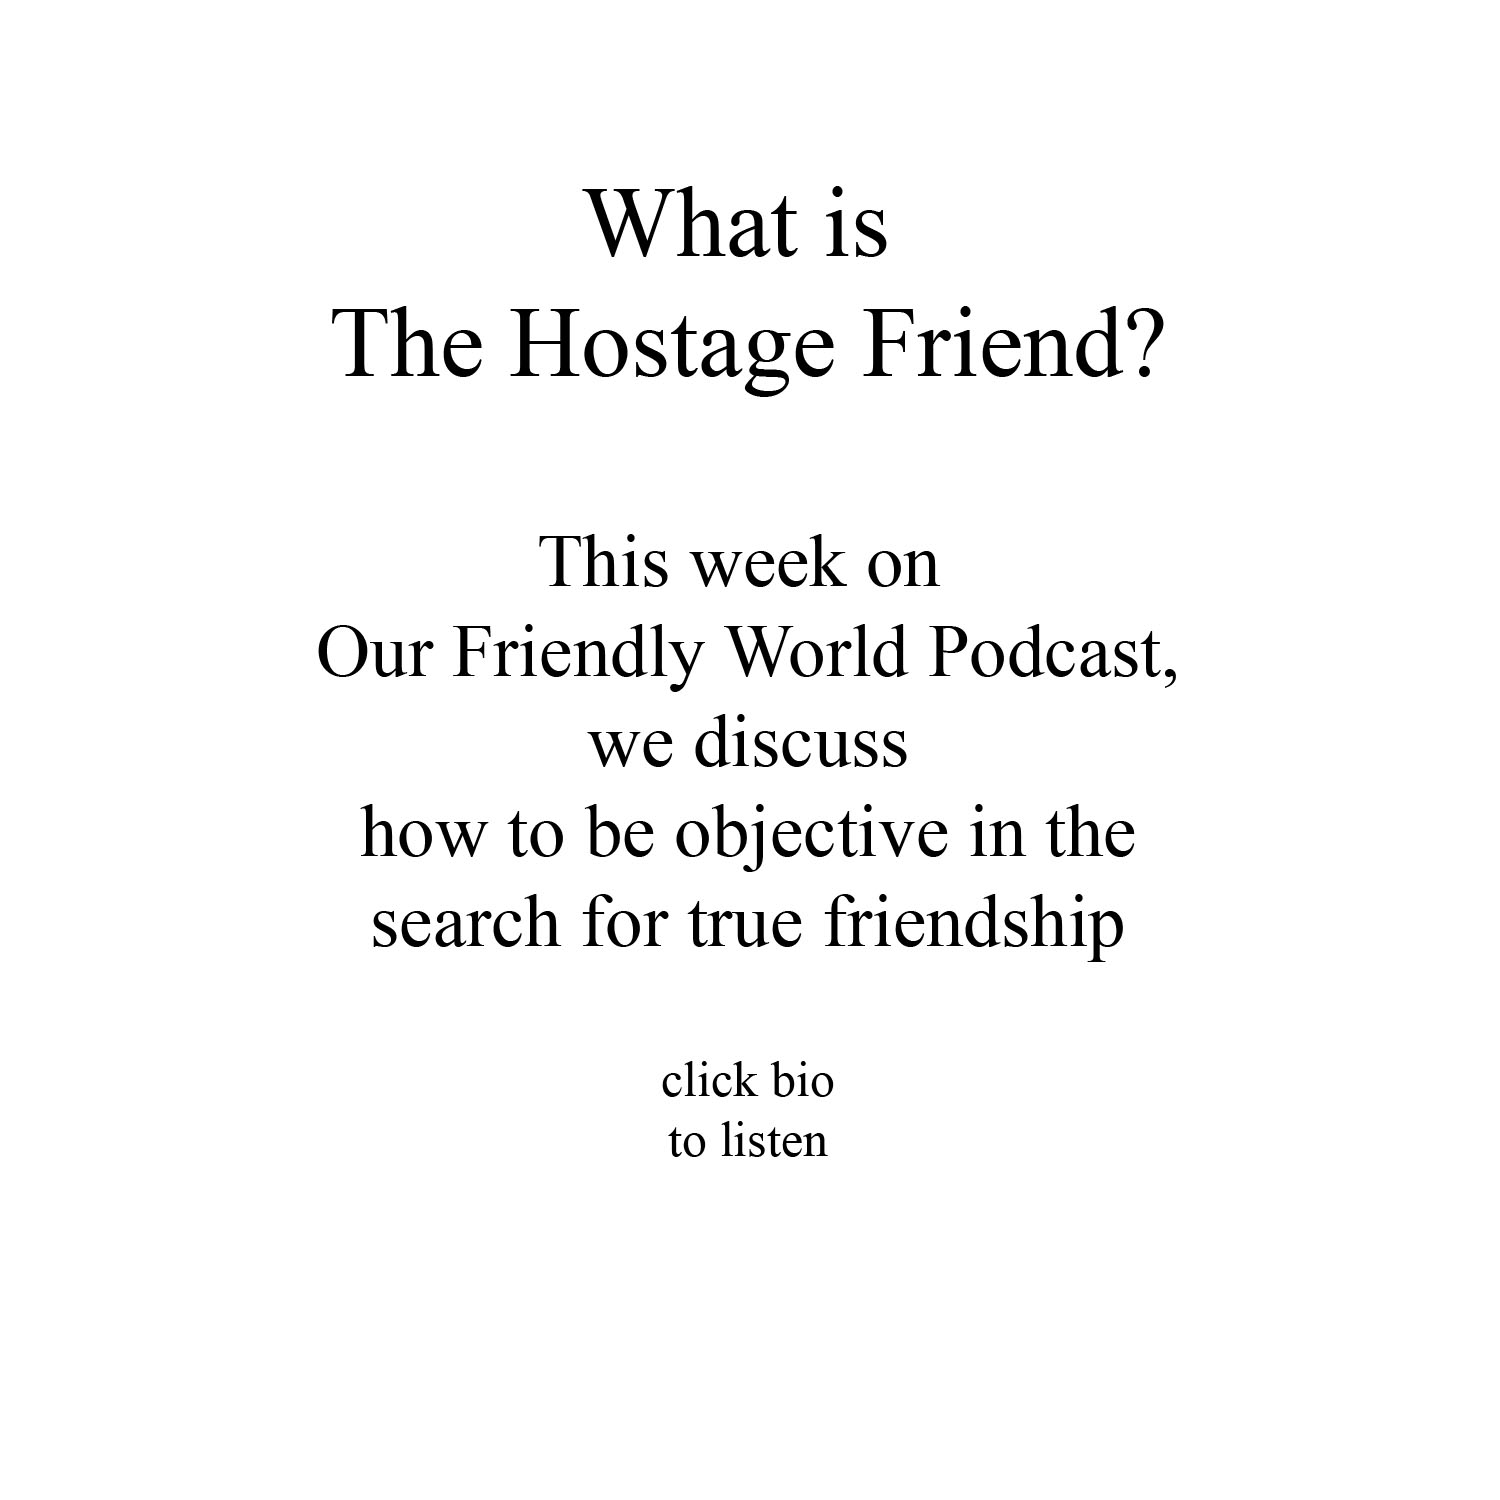 The Hostage Friend?